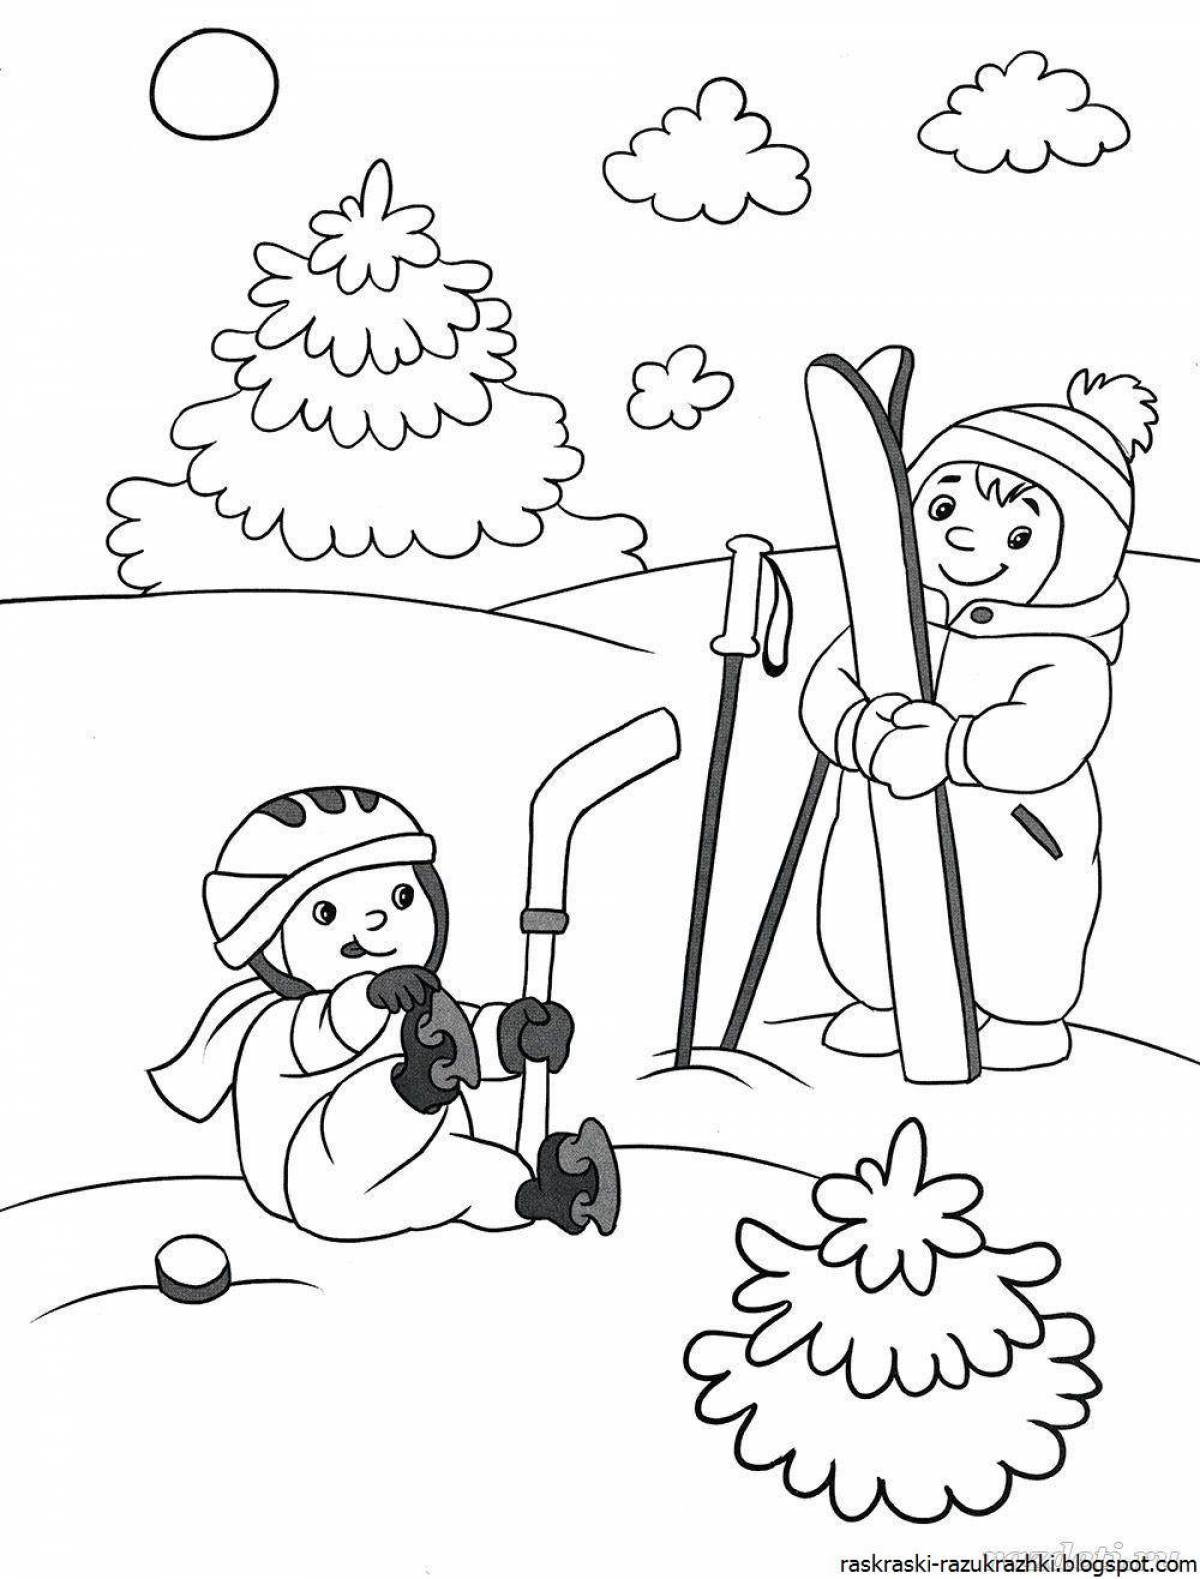 Shiny winter fun coloring book for 4-5 year olds